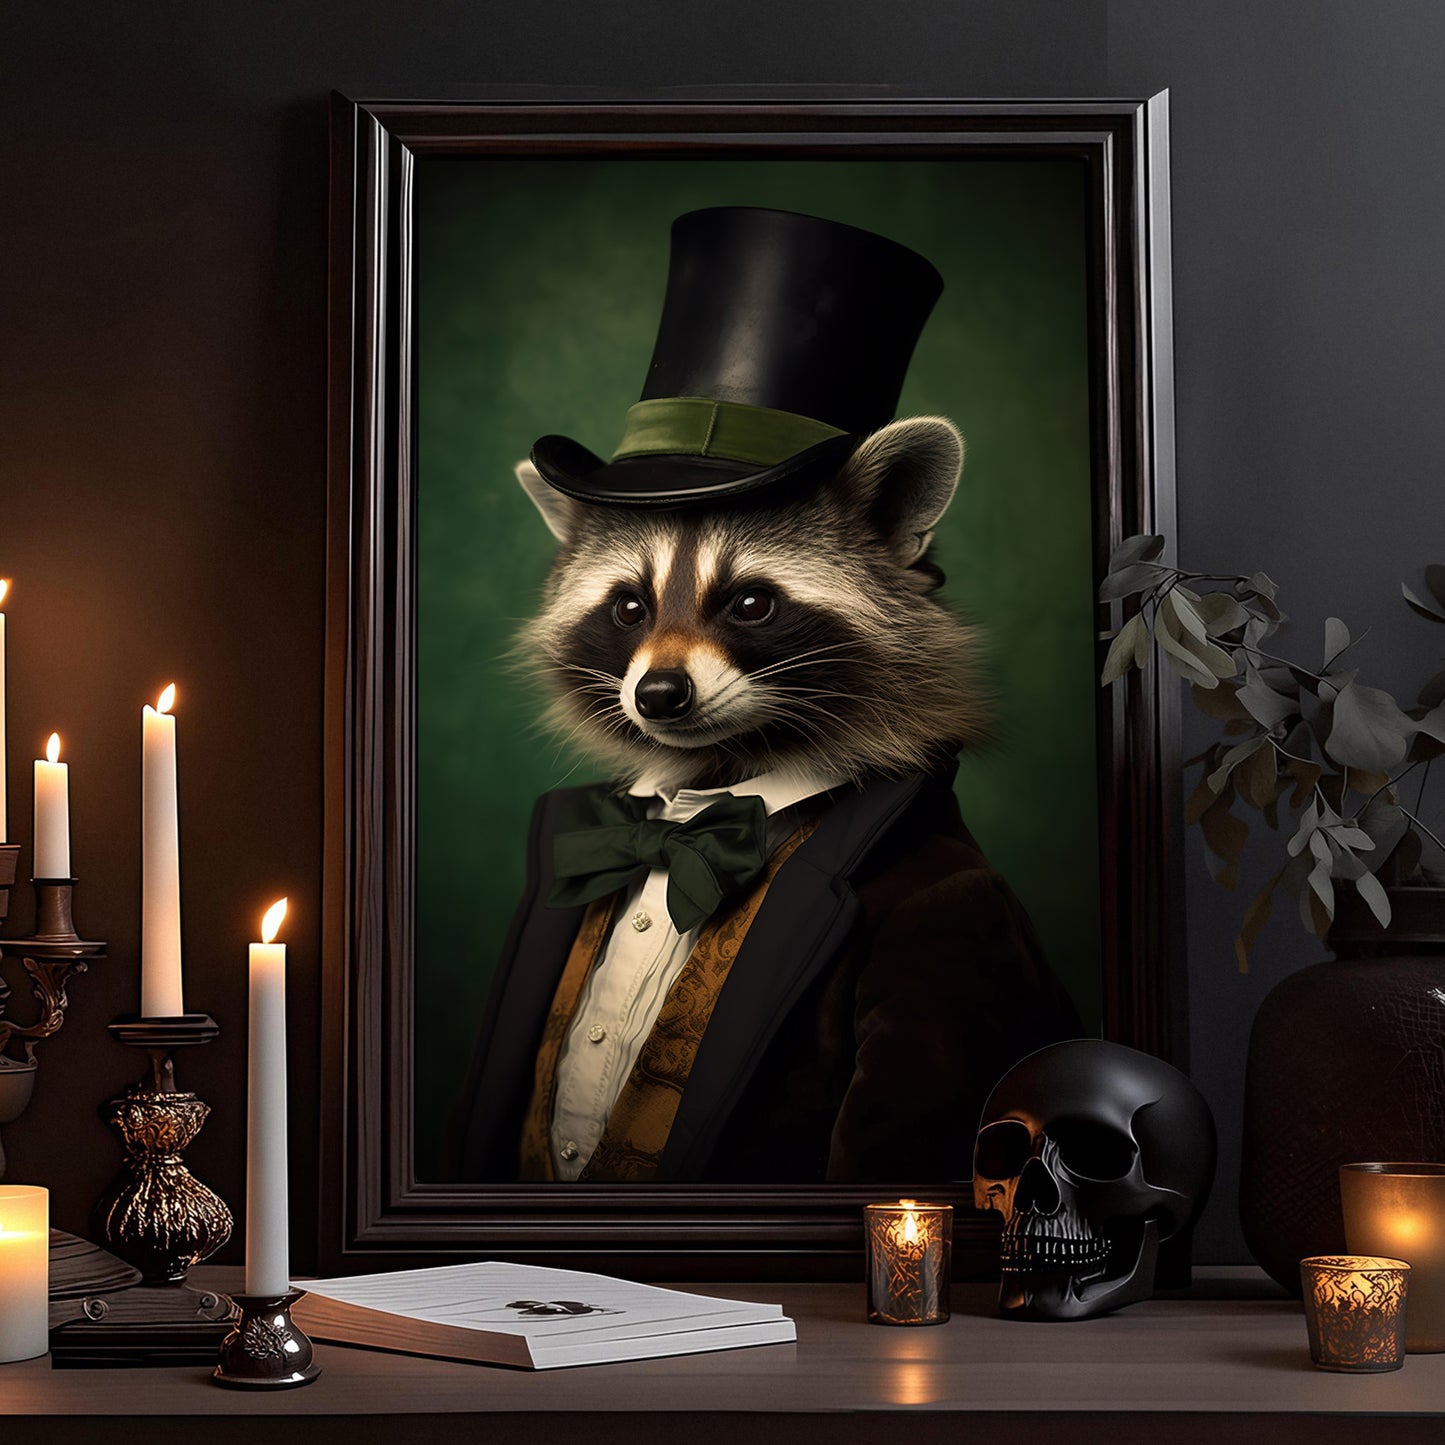 Vintage Victorian Raccoon In Suit, Gothic Canvas Painting, Victorian Animal Wall Art Decor - Dark Academia Raccoon Poster Gift